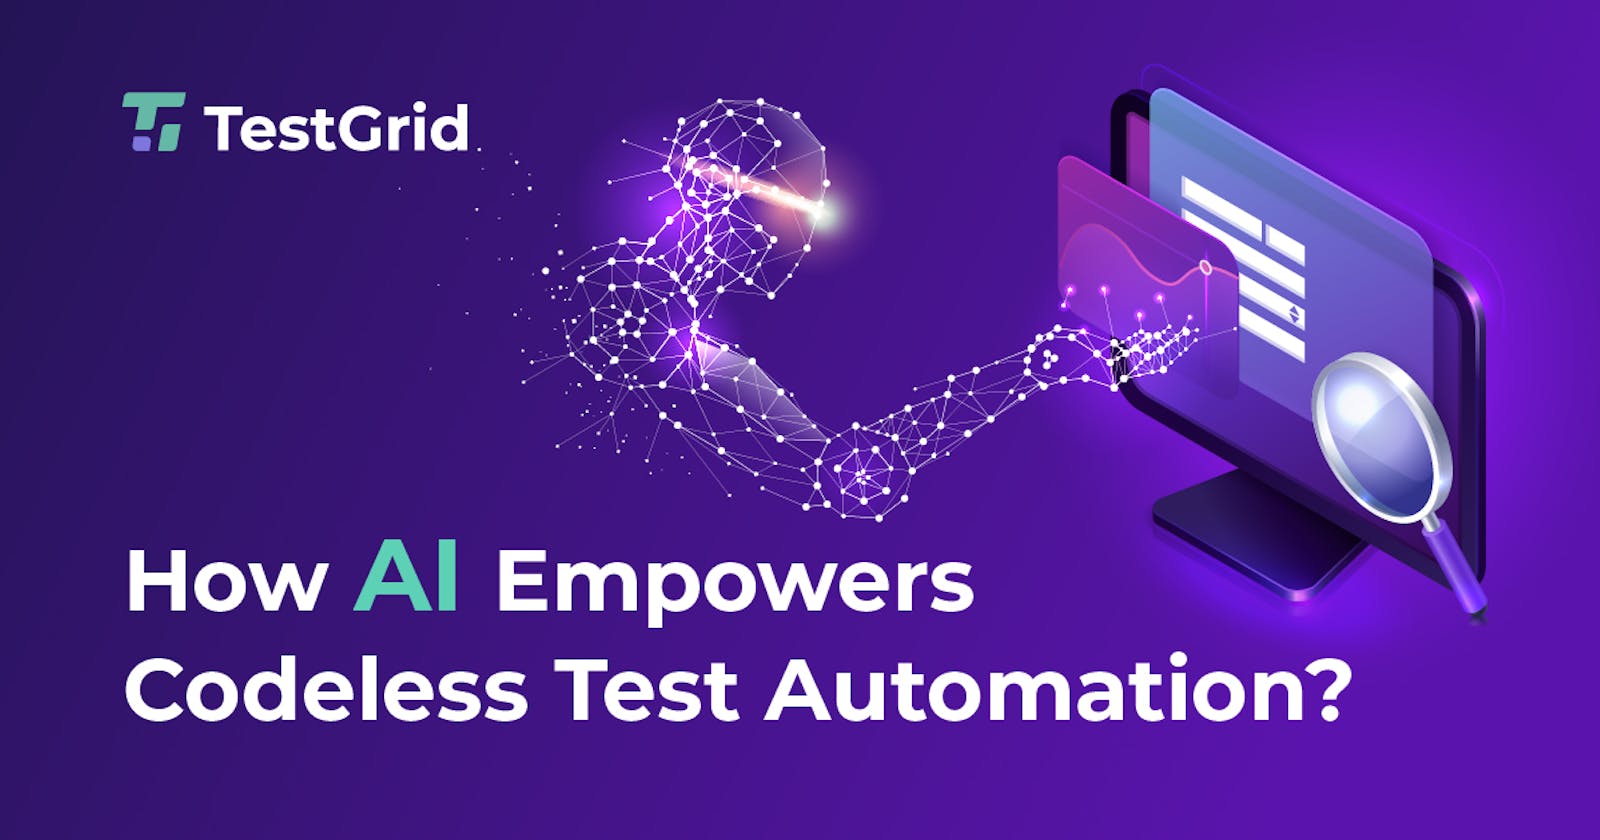 How AI Empowers Codeless Test Automation?